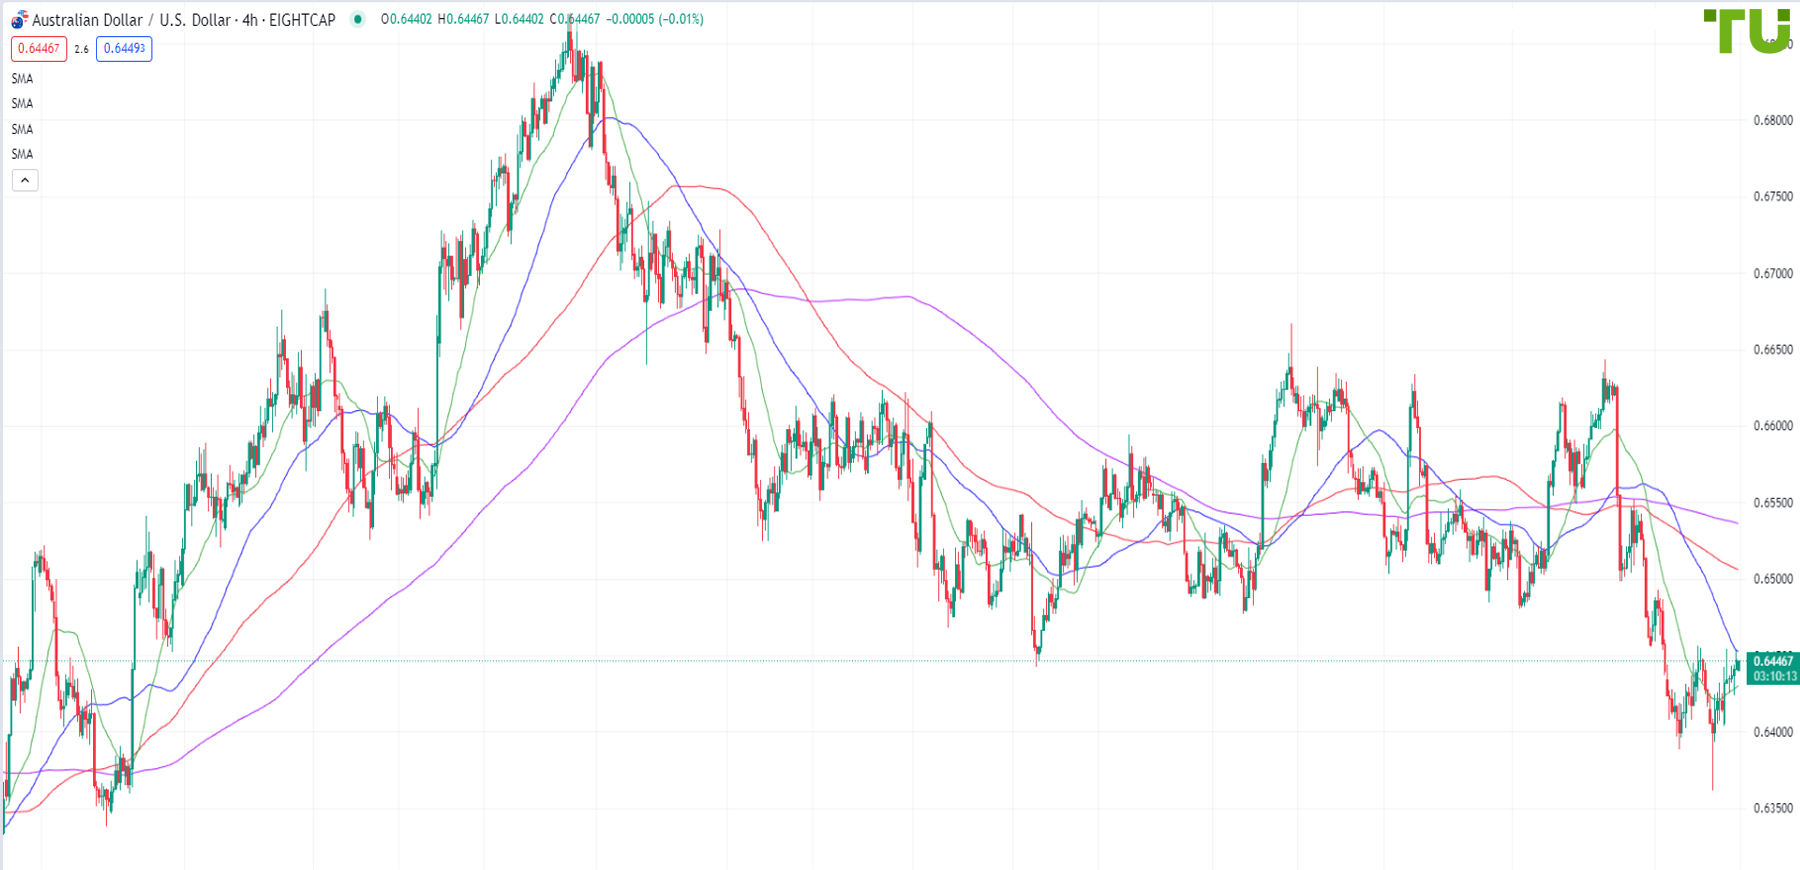 AUD/USD is attempting to move higher